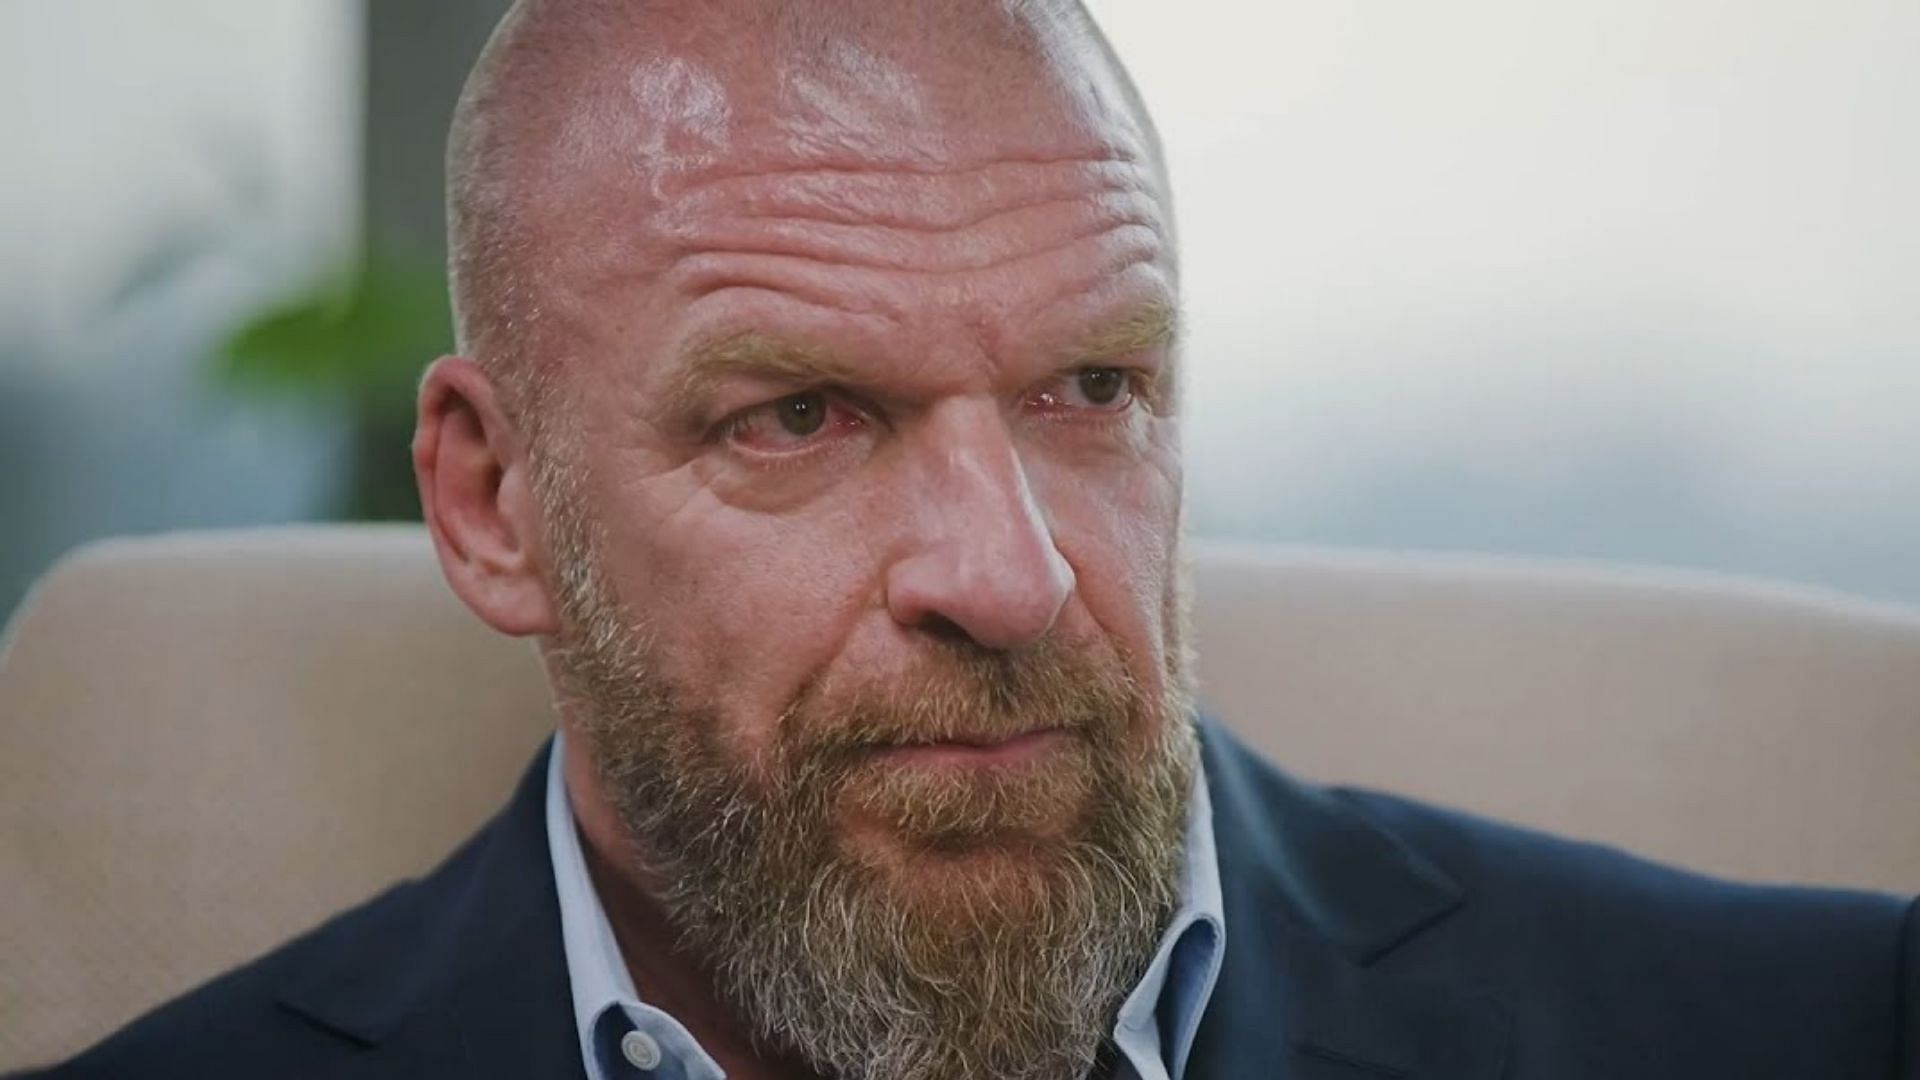 Triple H might have to make a hard call